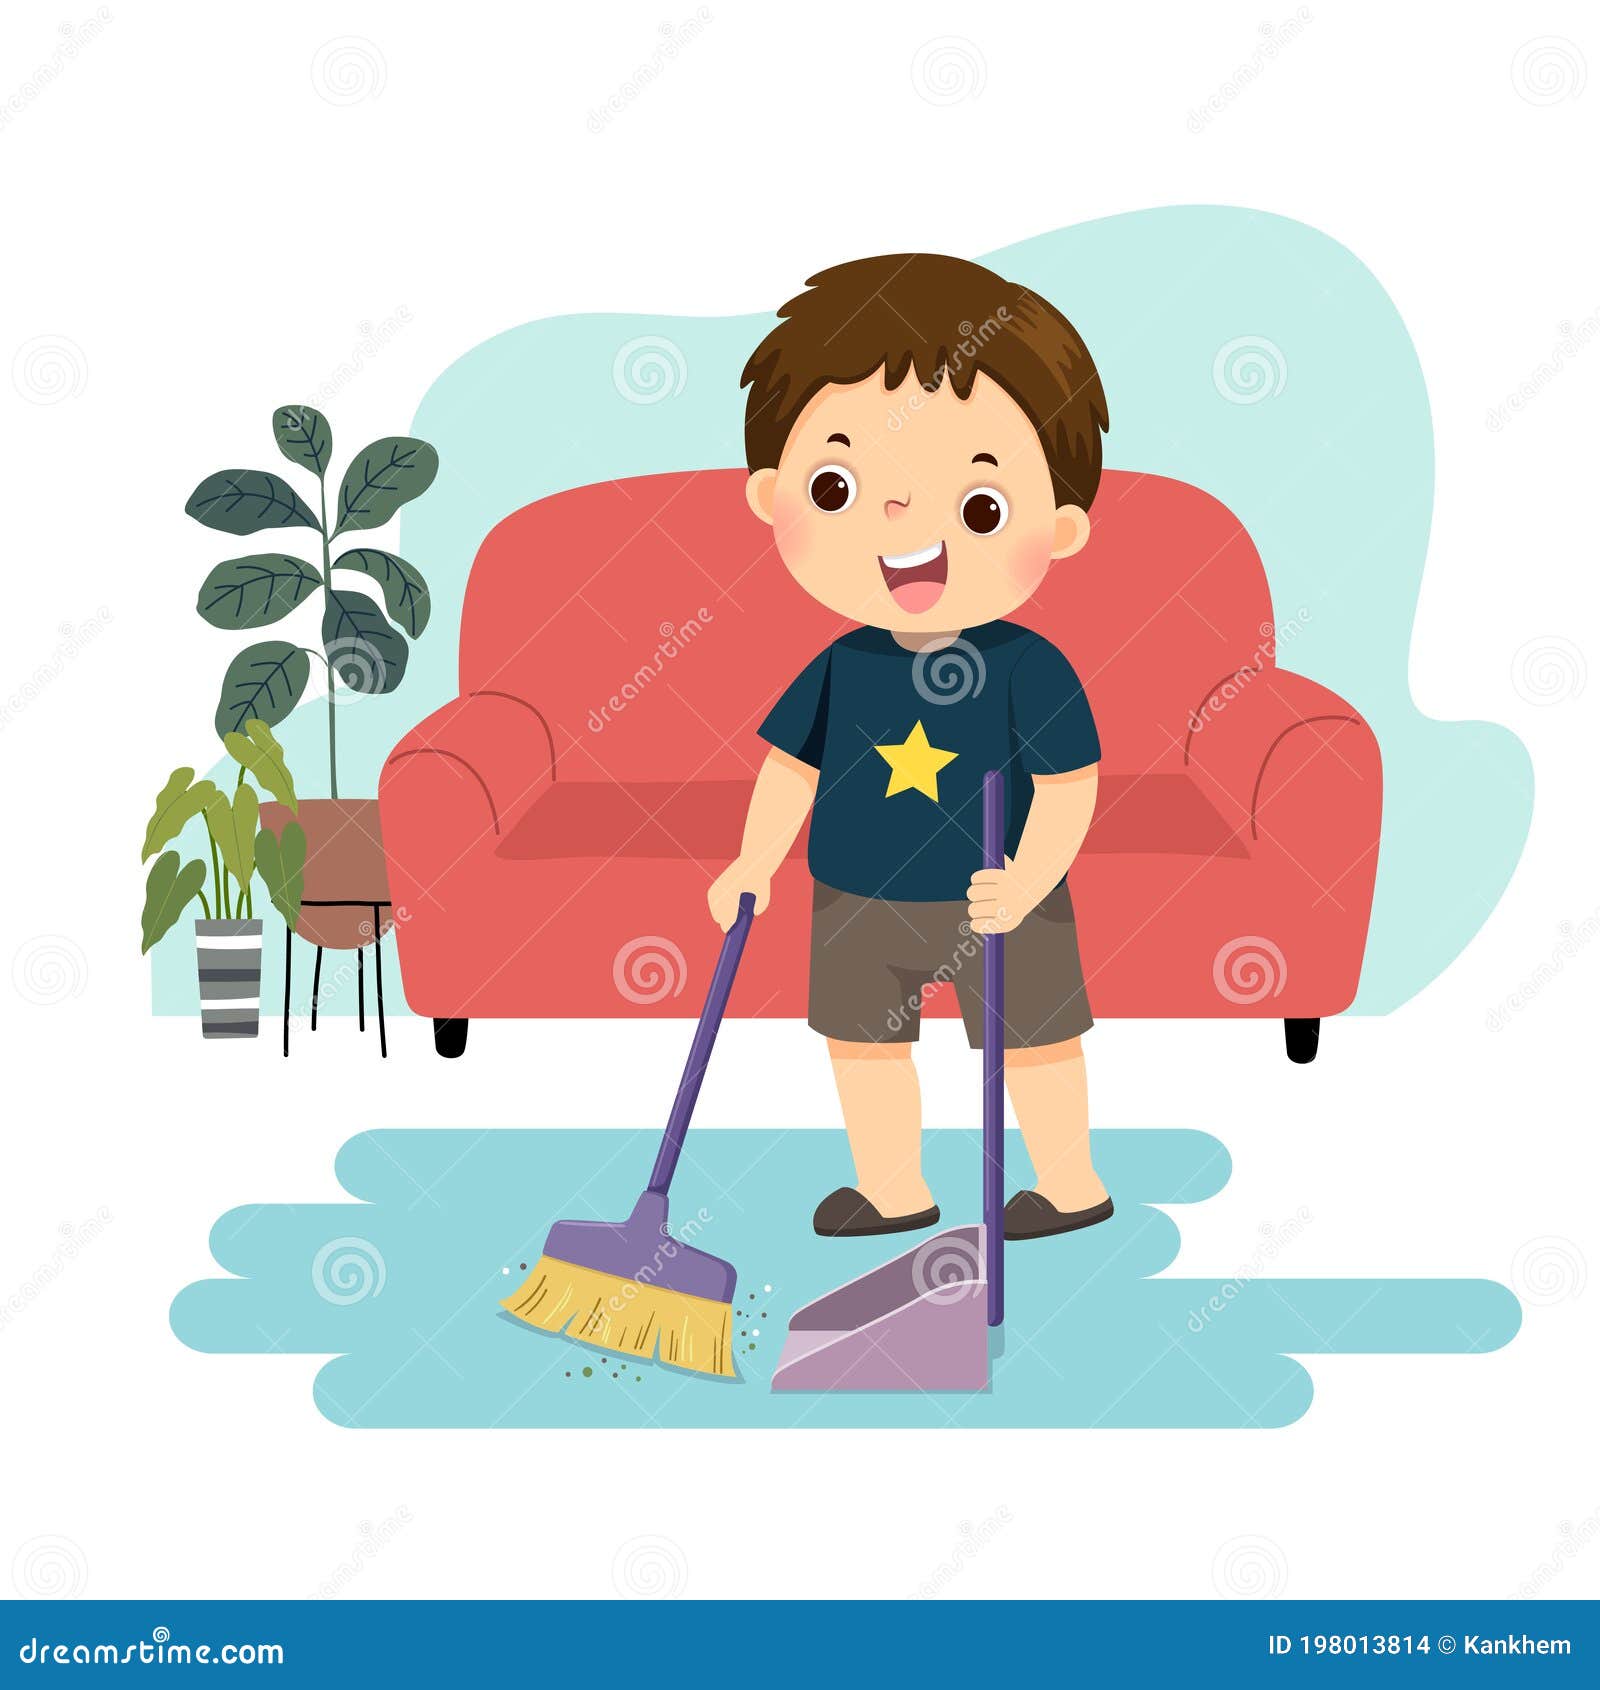 cartoon of a little boy sweeping the floor. kids doing housework chores at home concept